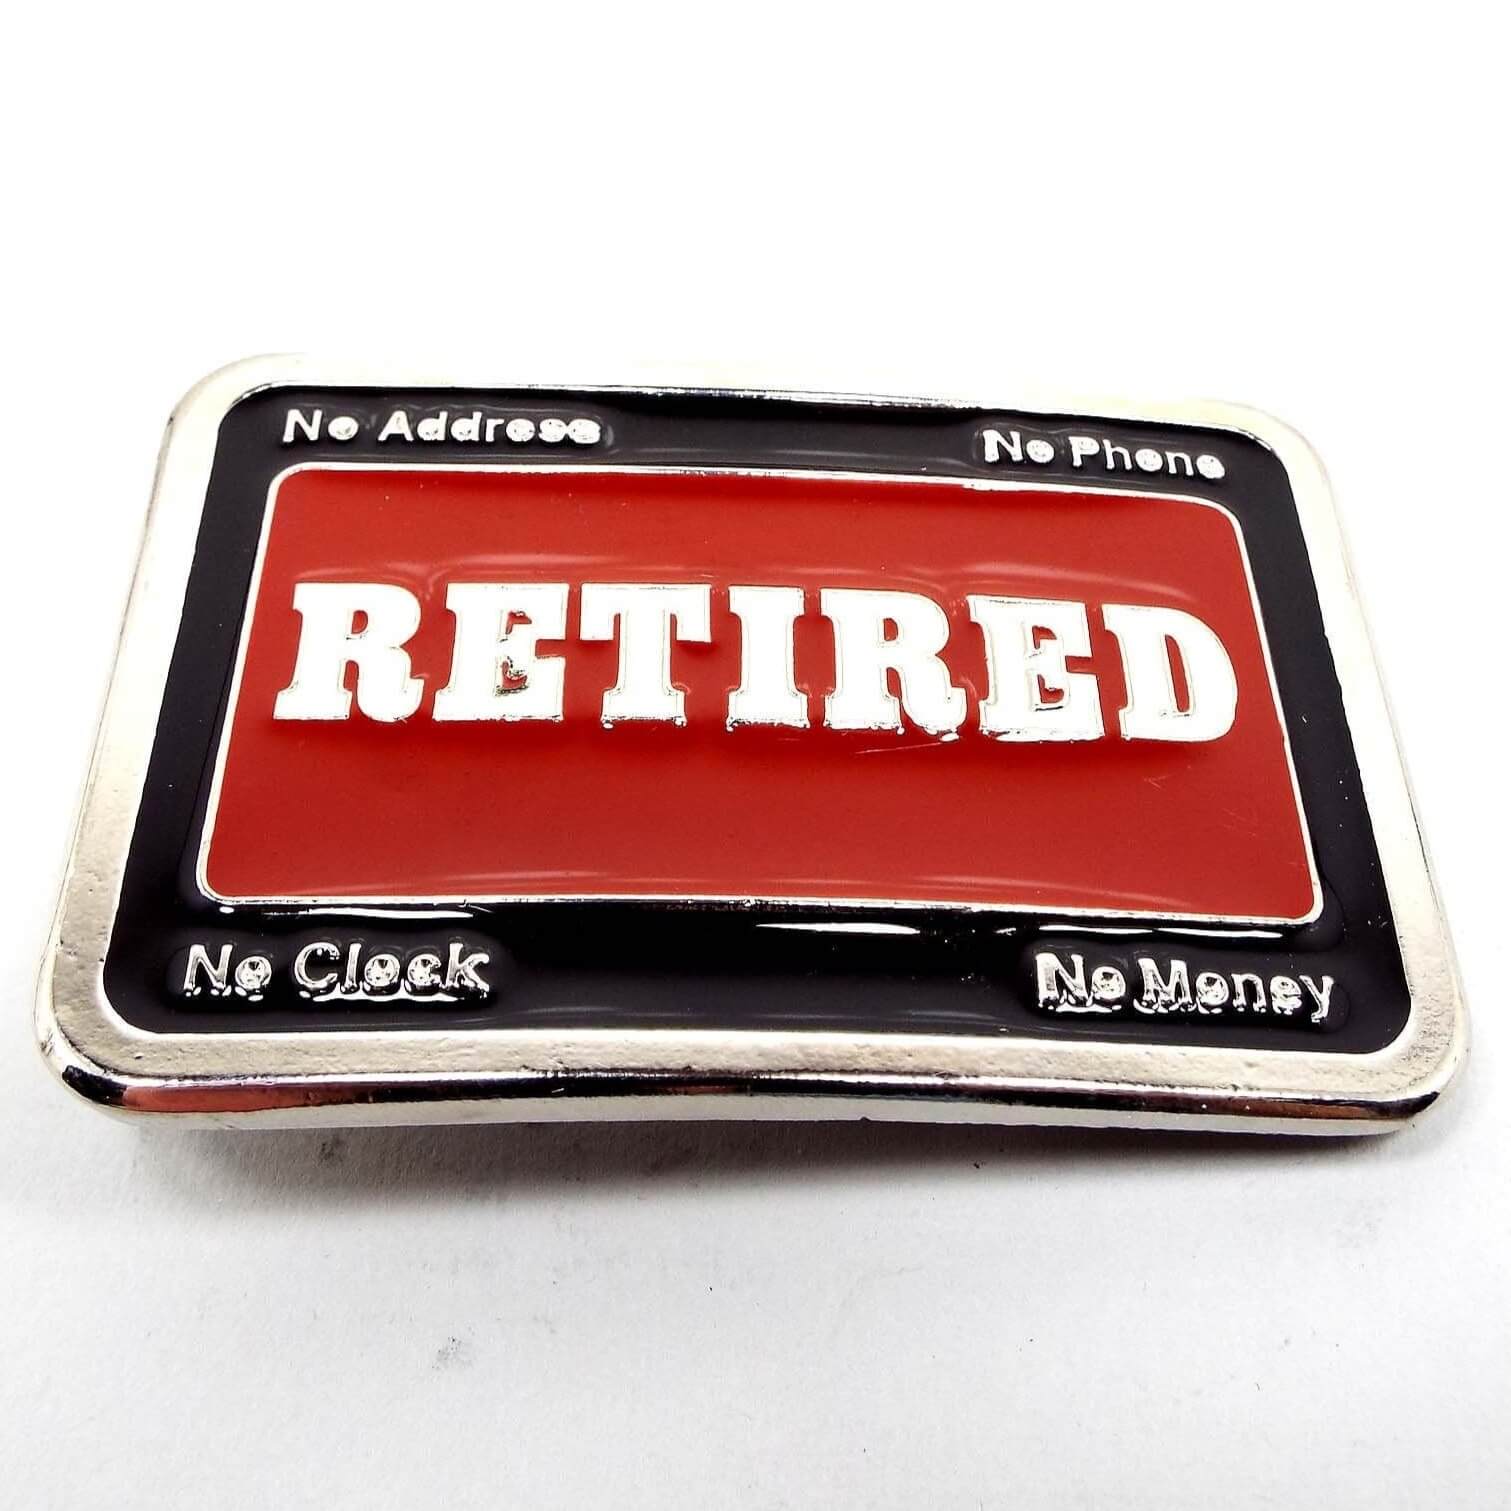 Front view of the retro vintage Retired belt buckle. The metal is silver tone in color. The middle says Retired with red enamel around it. The edge is black enameled and has no address, no phone, no clock, no money on the corners.